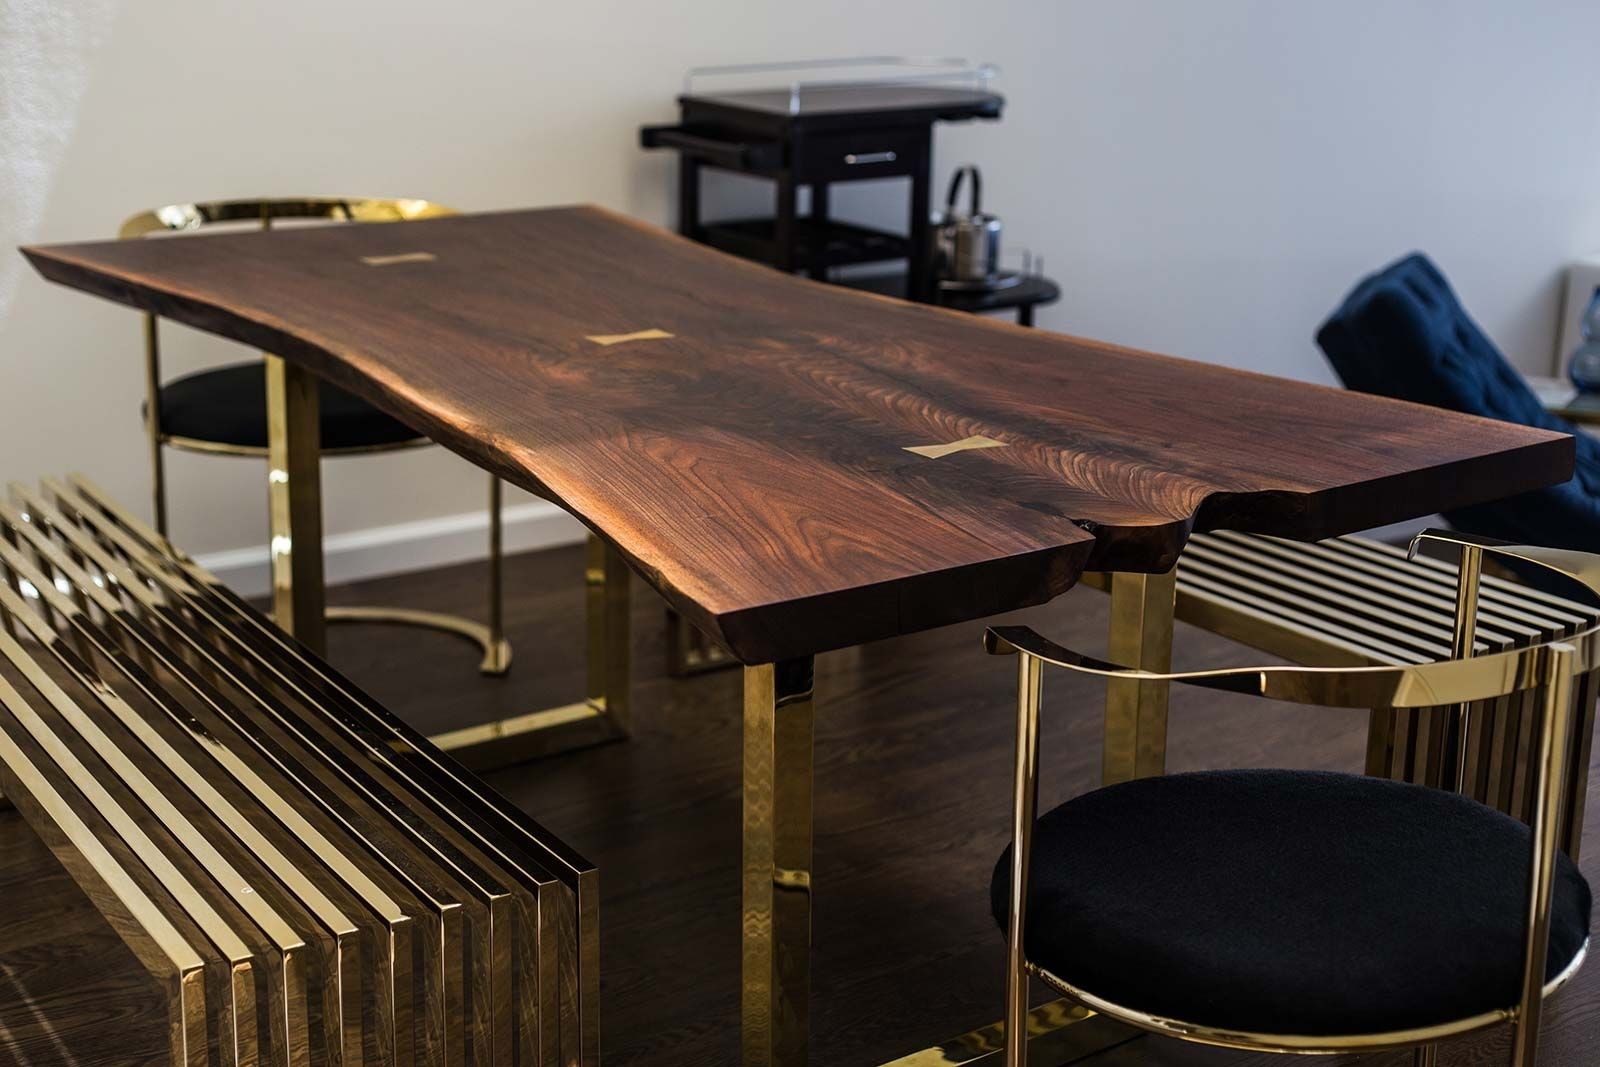 Live Edge Wood Slab Tables And Furniture | Re Co Bklyn In Slab Large Marble Coffee Tables With Brass Base (View 20 of 30)